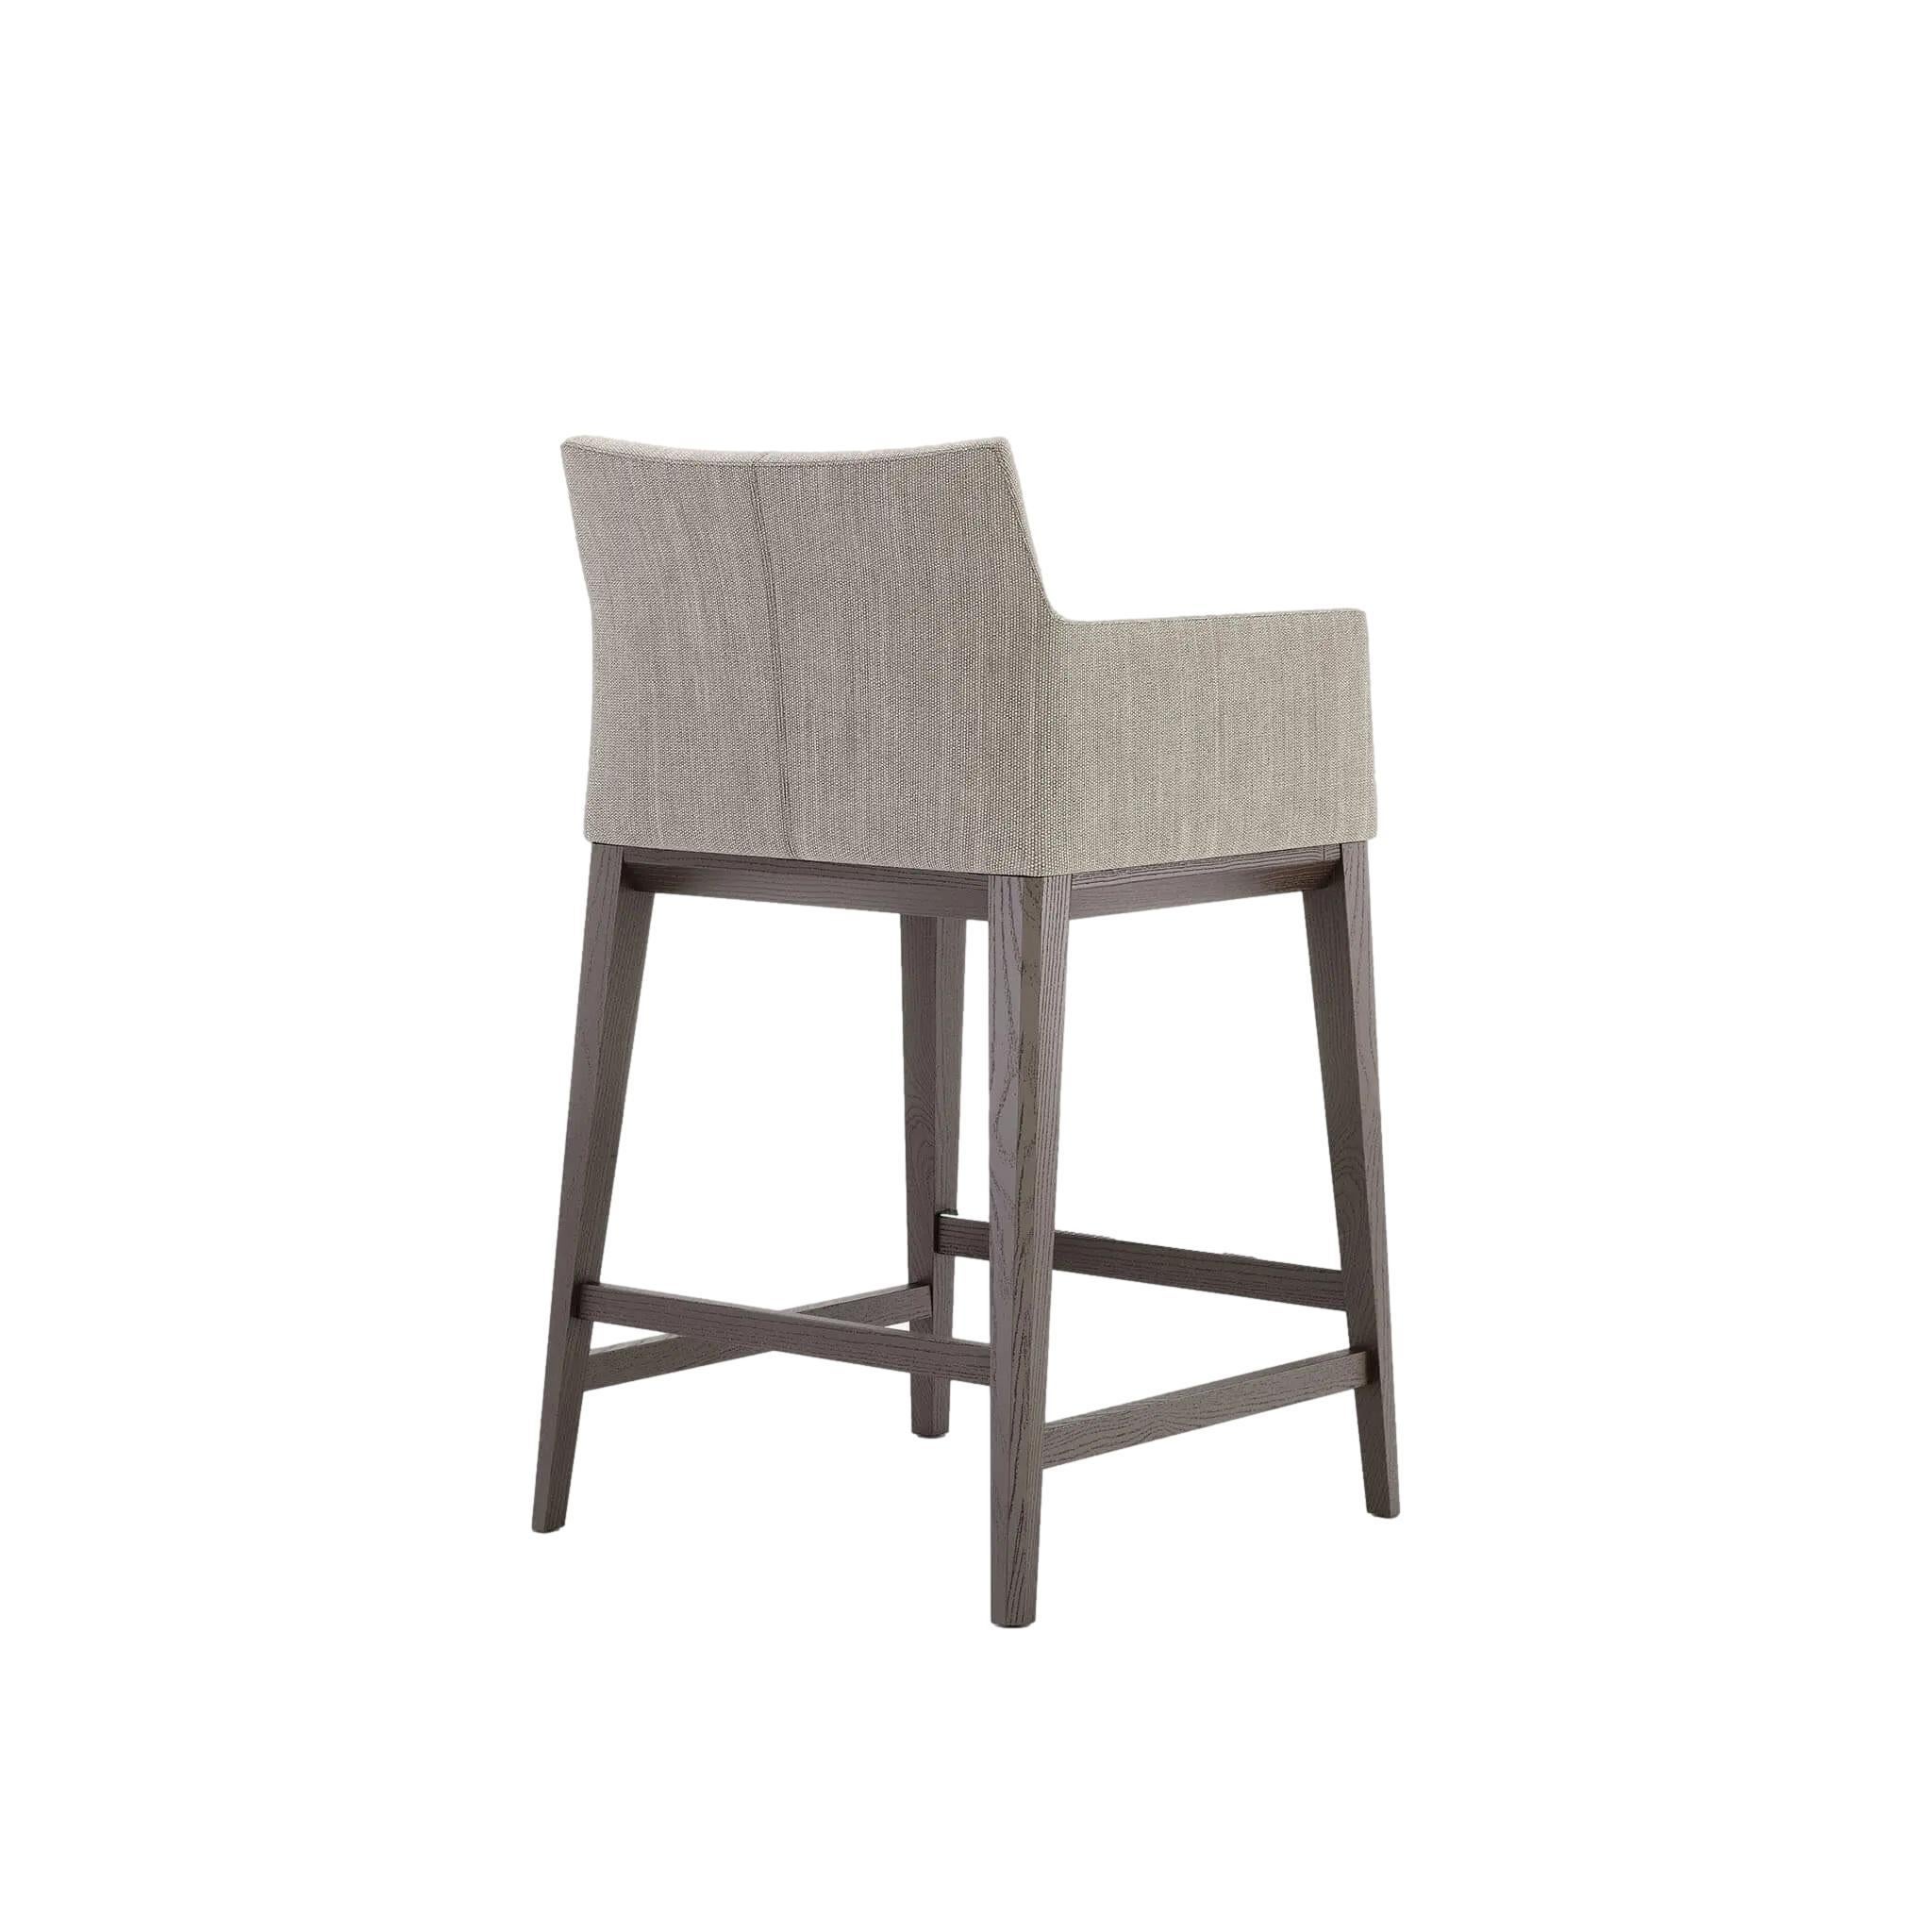 Upholstered Stool Offered in Solid Wood Structure 5